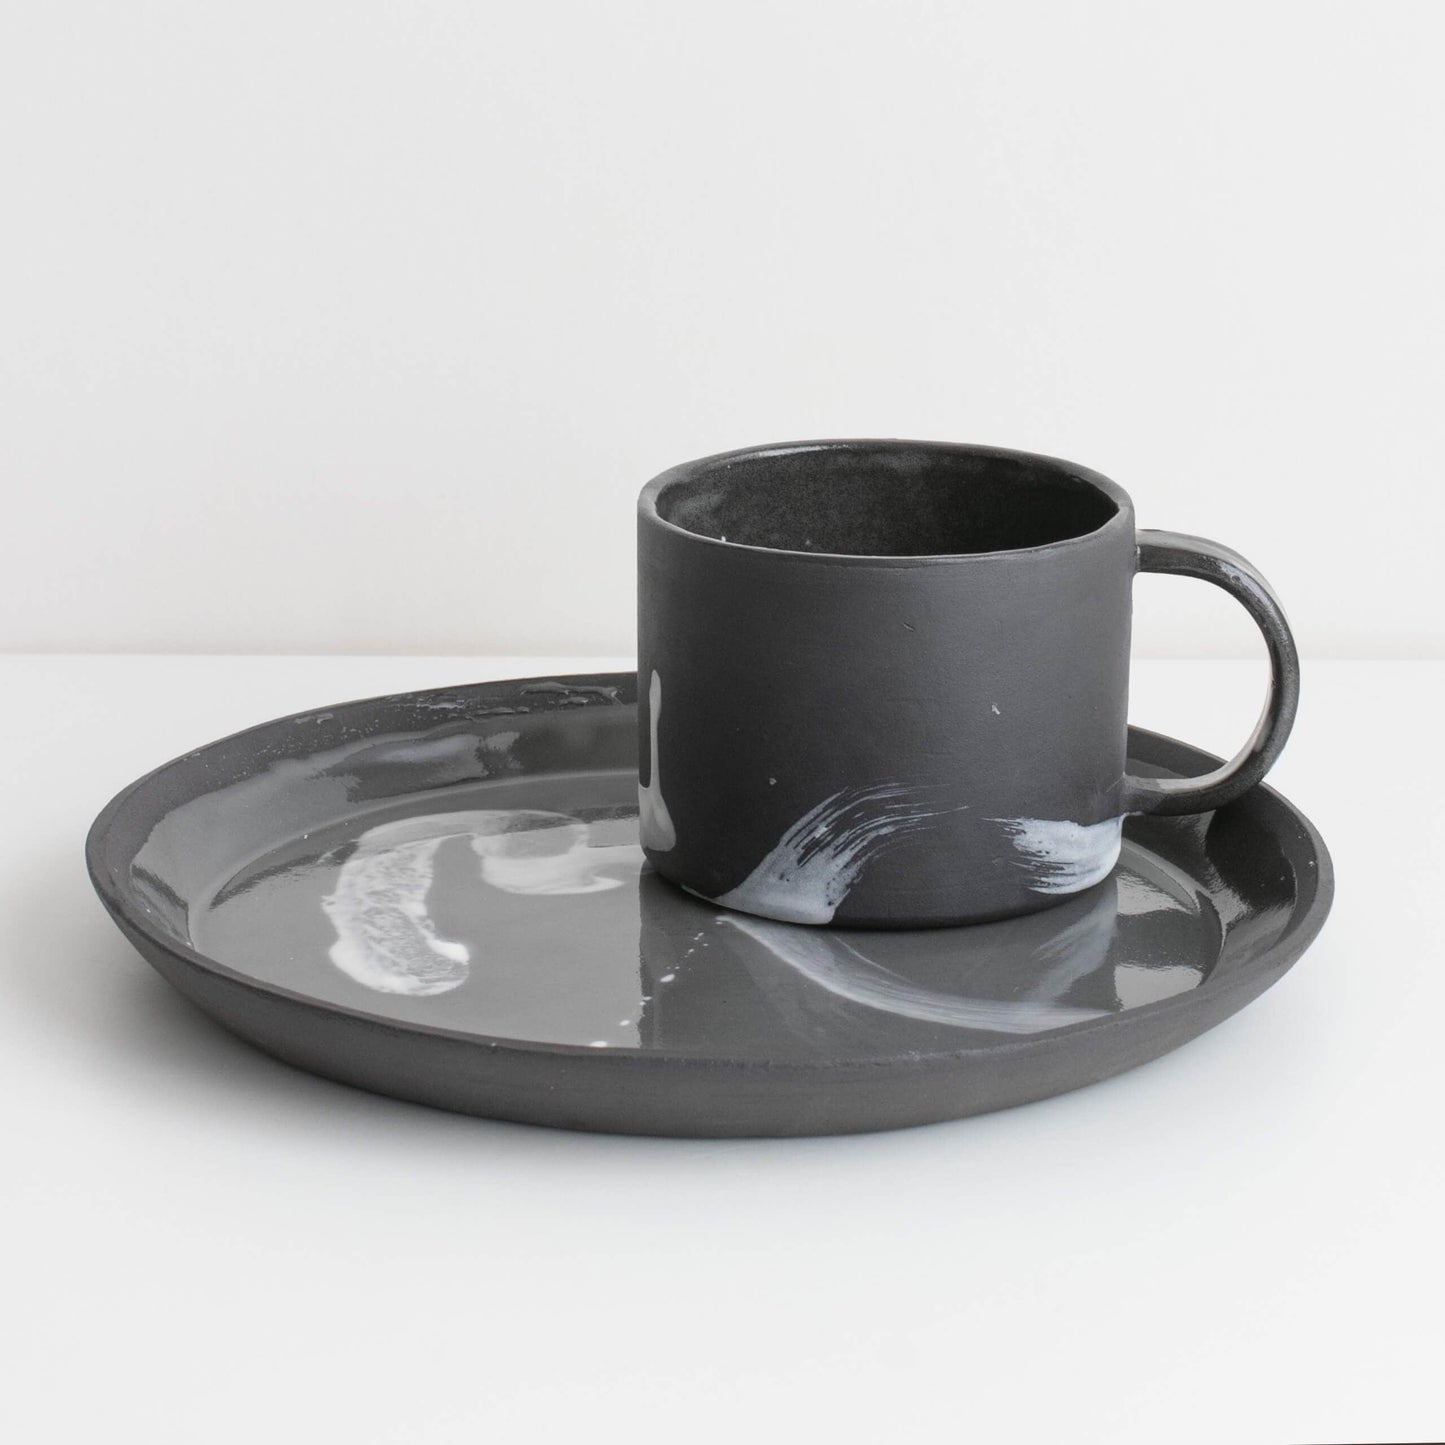 Naked Clay Ceramics Side Plate - 'Spirit' (Black Clay with Porcelain brushstrokes)